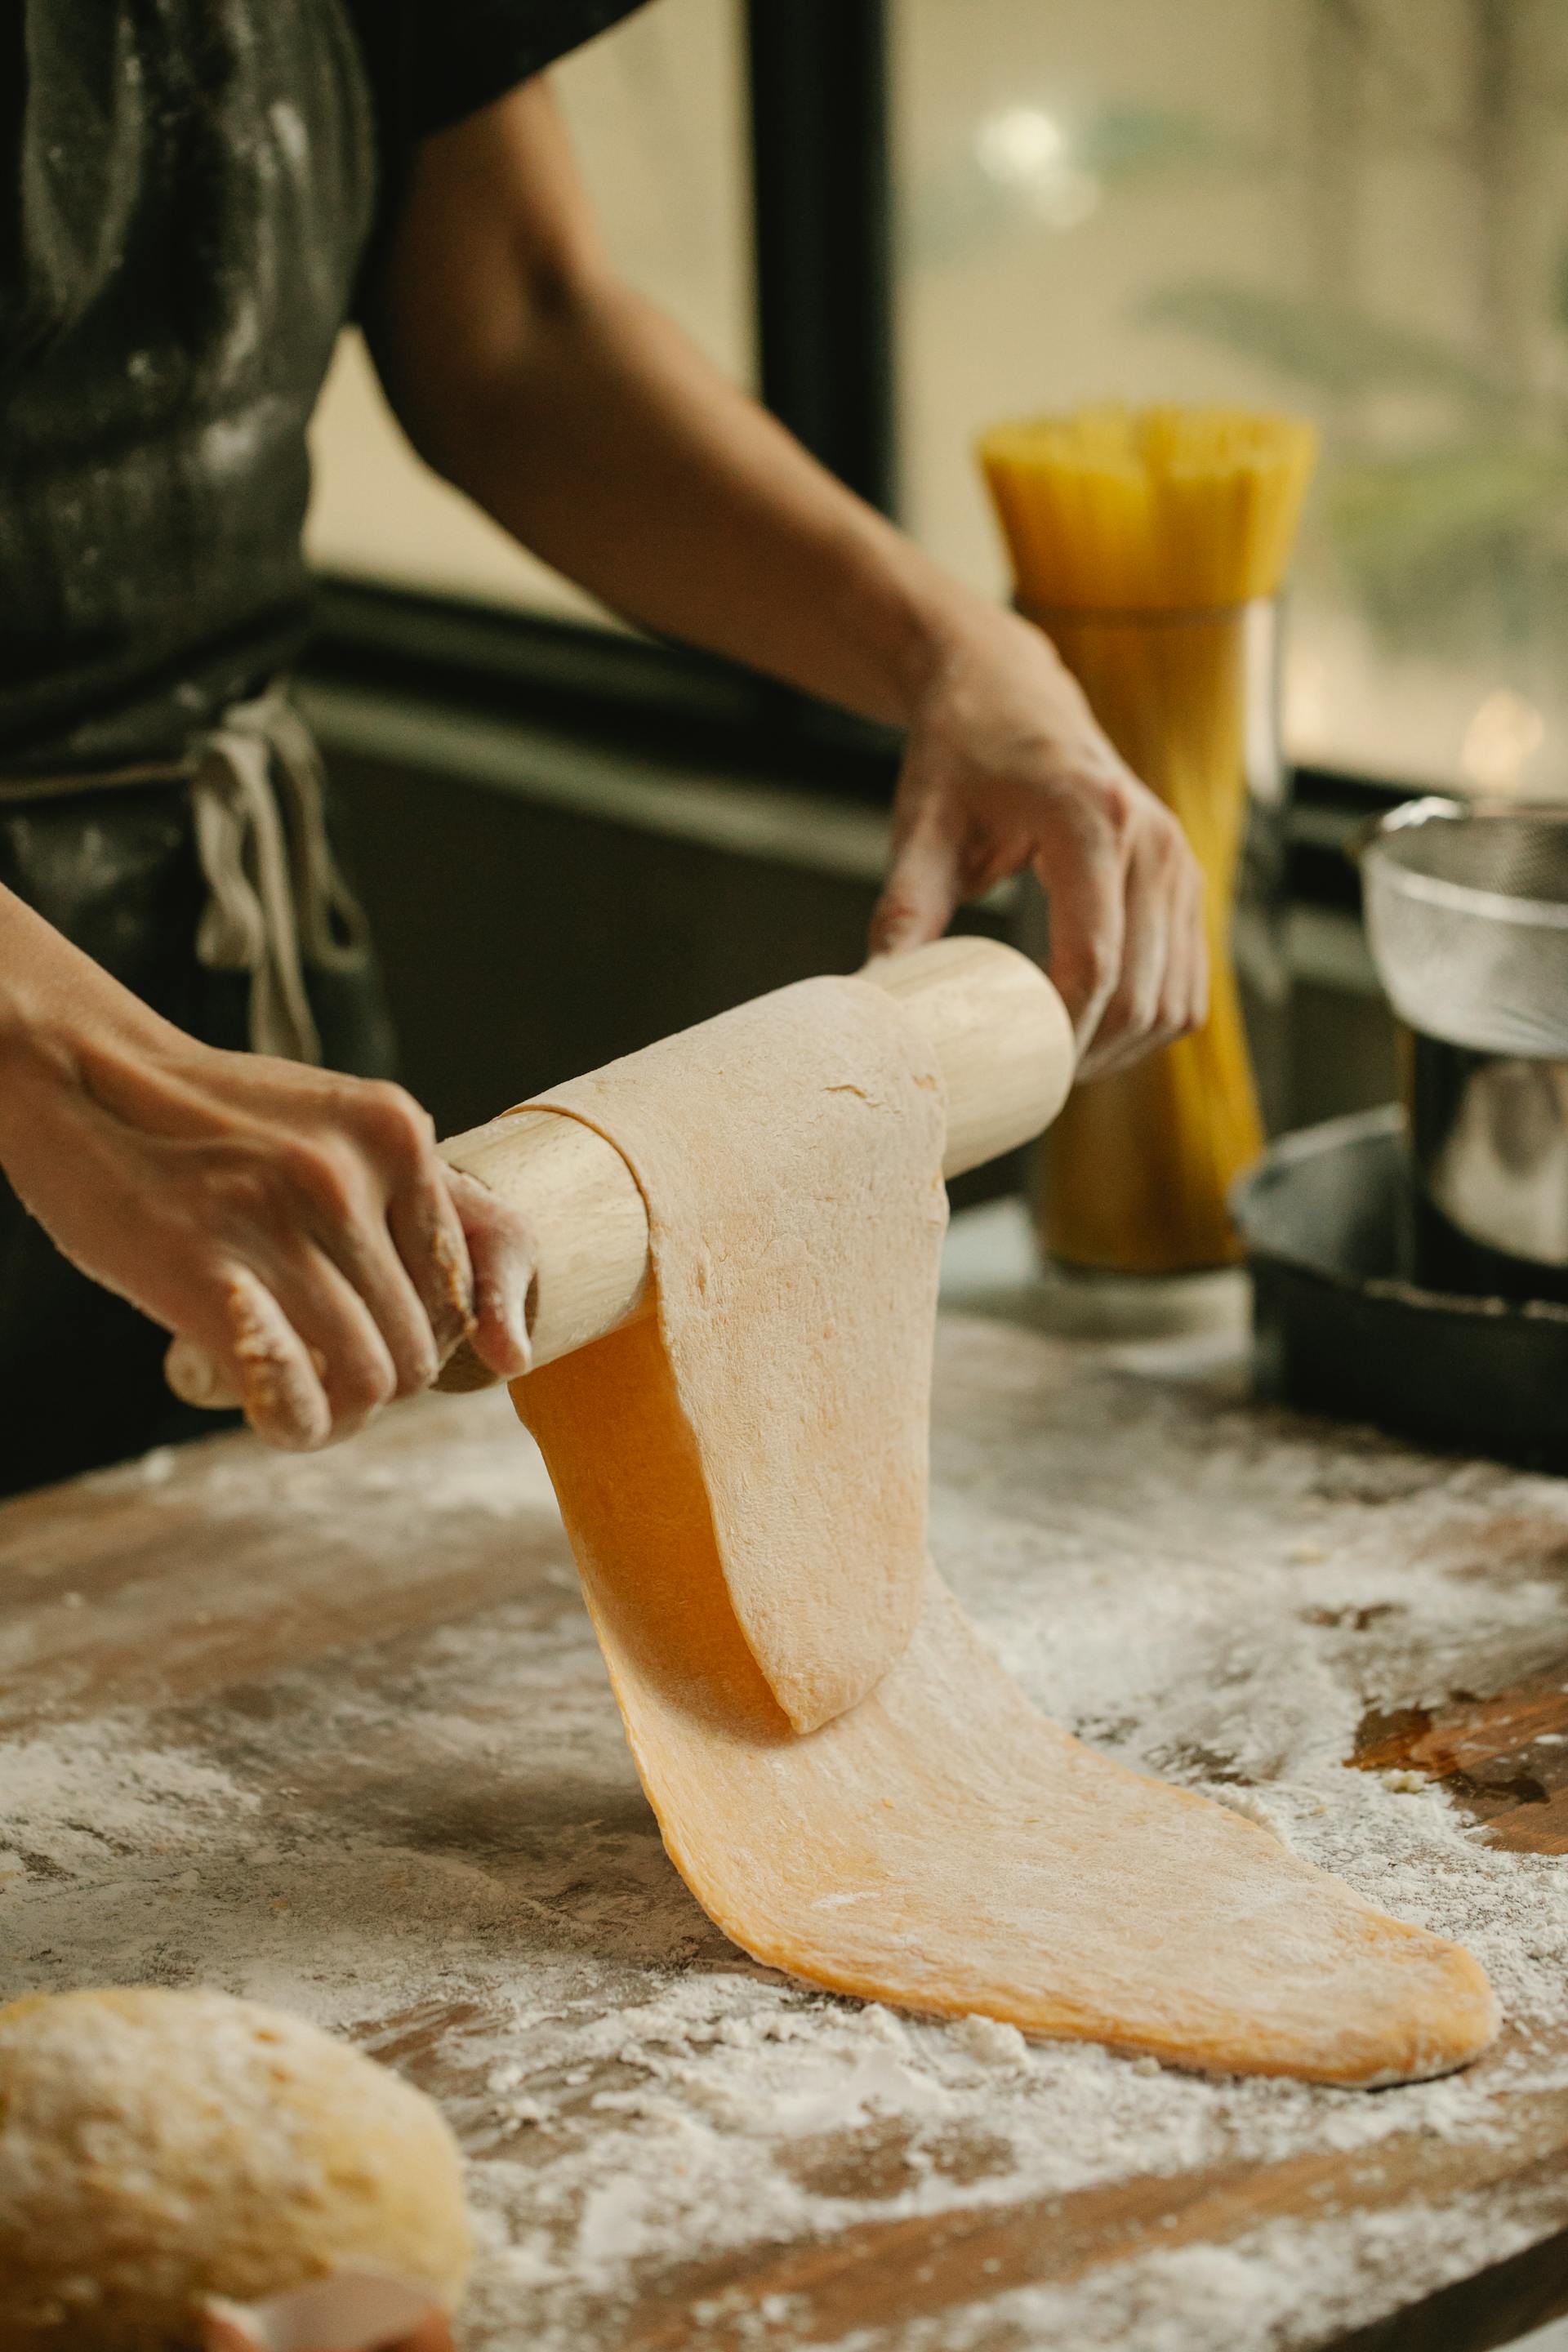 A close-up shot of a young woman rolling pasta dough on floury table at home | Source: Pexels